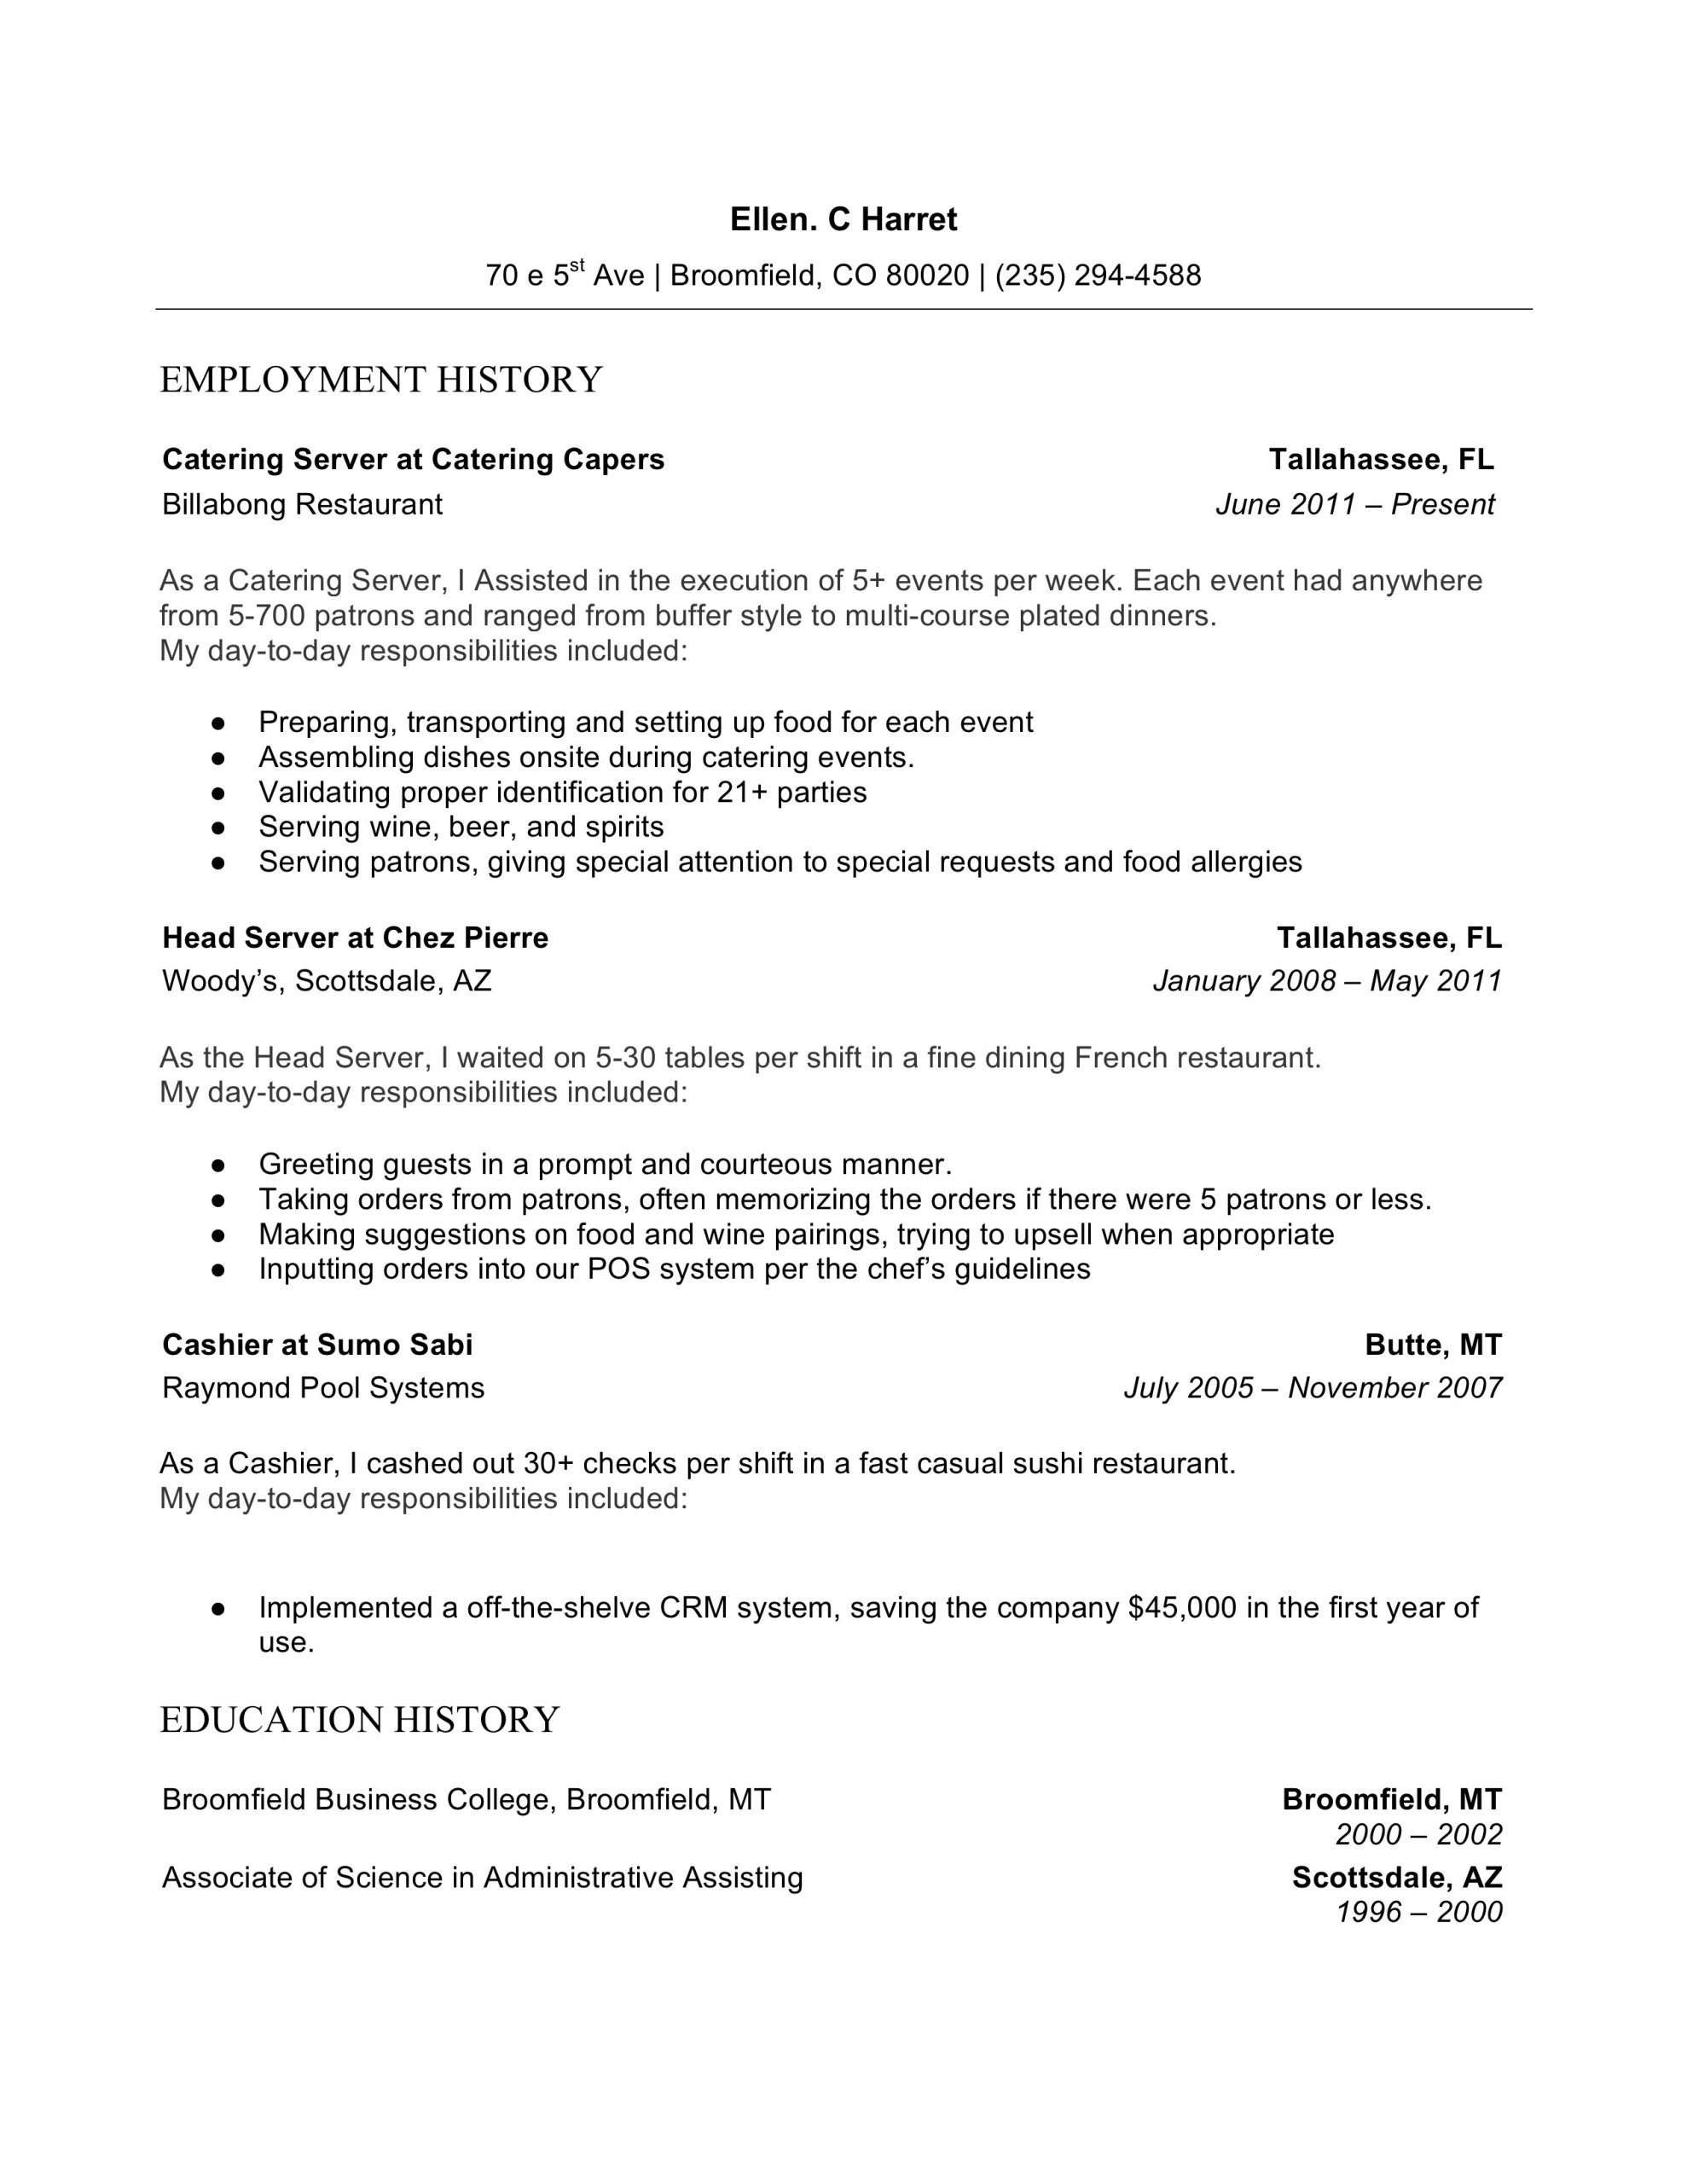 Chronological Resume Sample for College Students Resume formats: Chronological, Functional, & Combo 2020